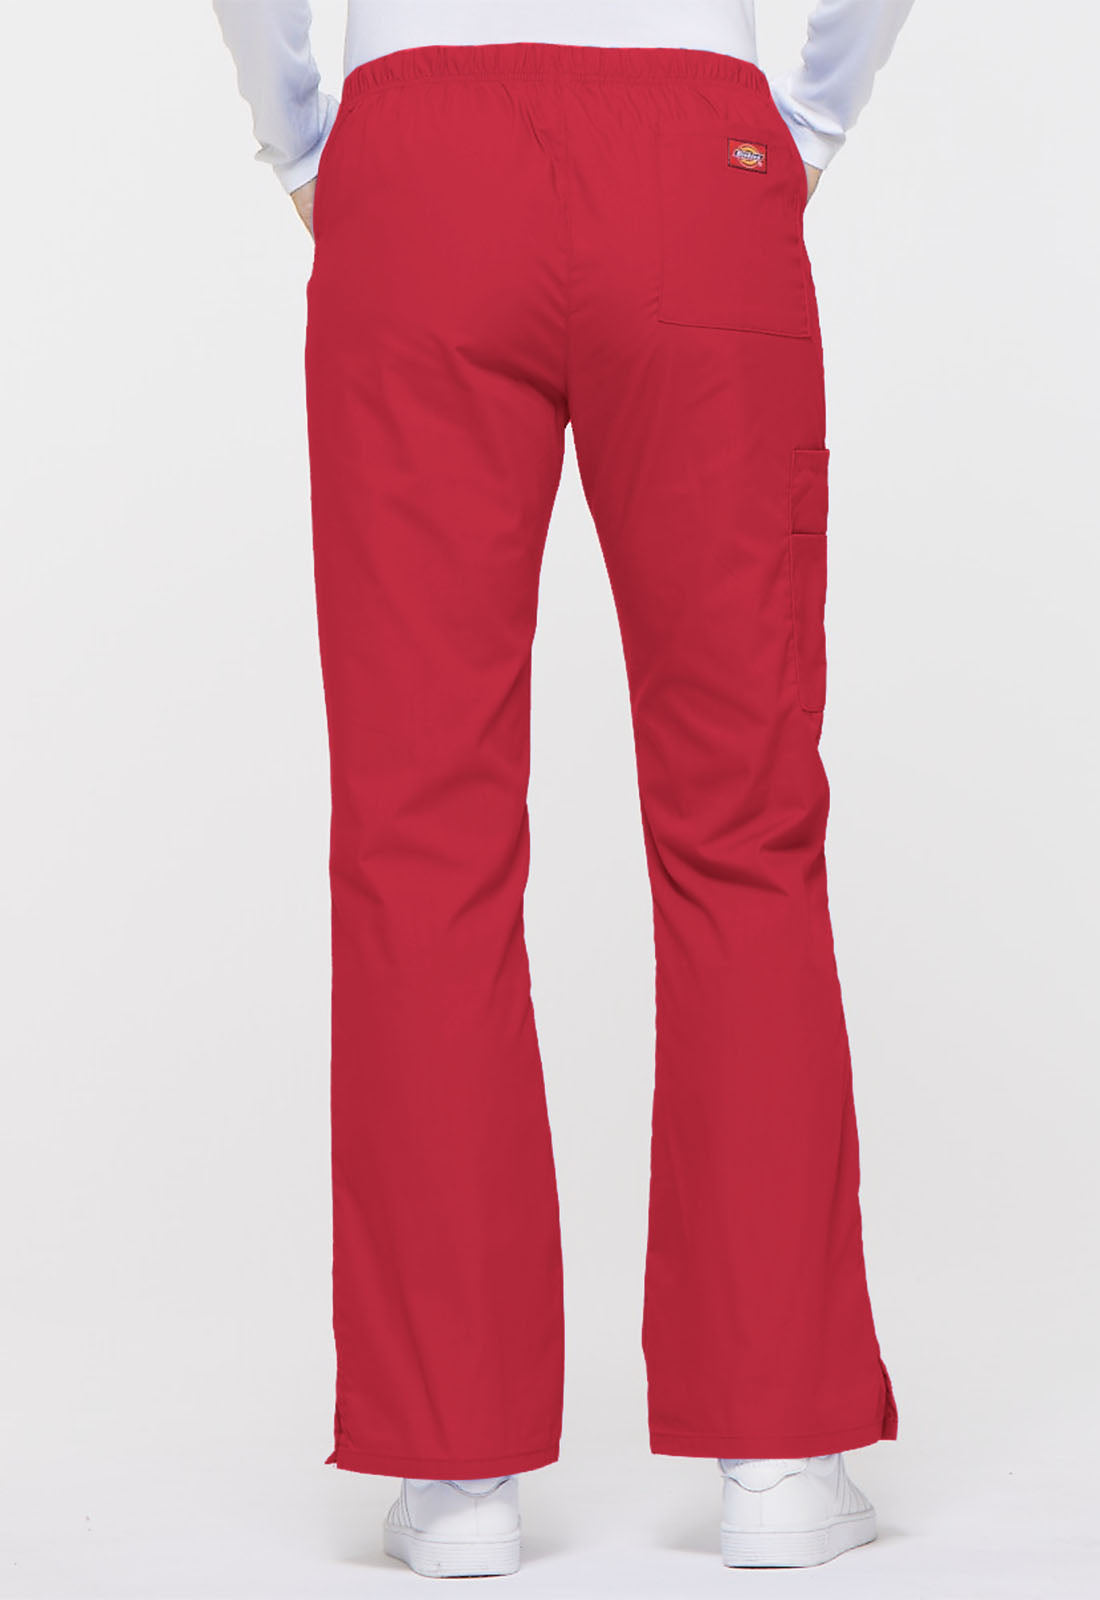 Exist. Conjunto Mujer Dickies EDS Signature Mod.85906/86206 Red